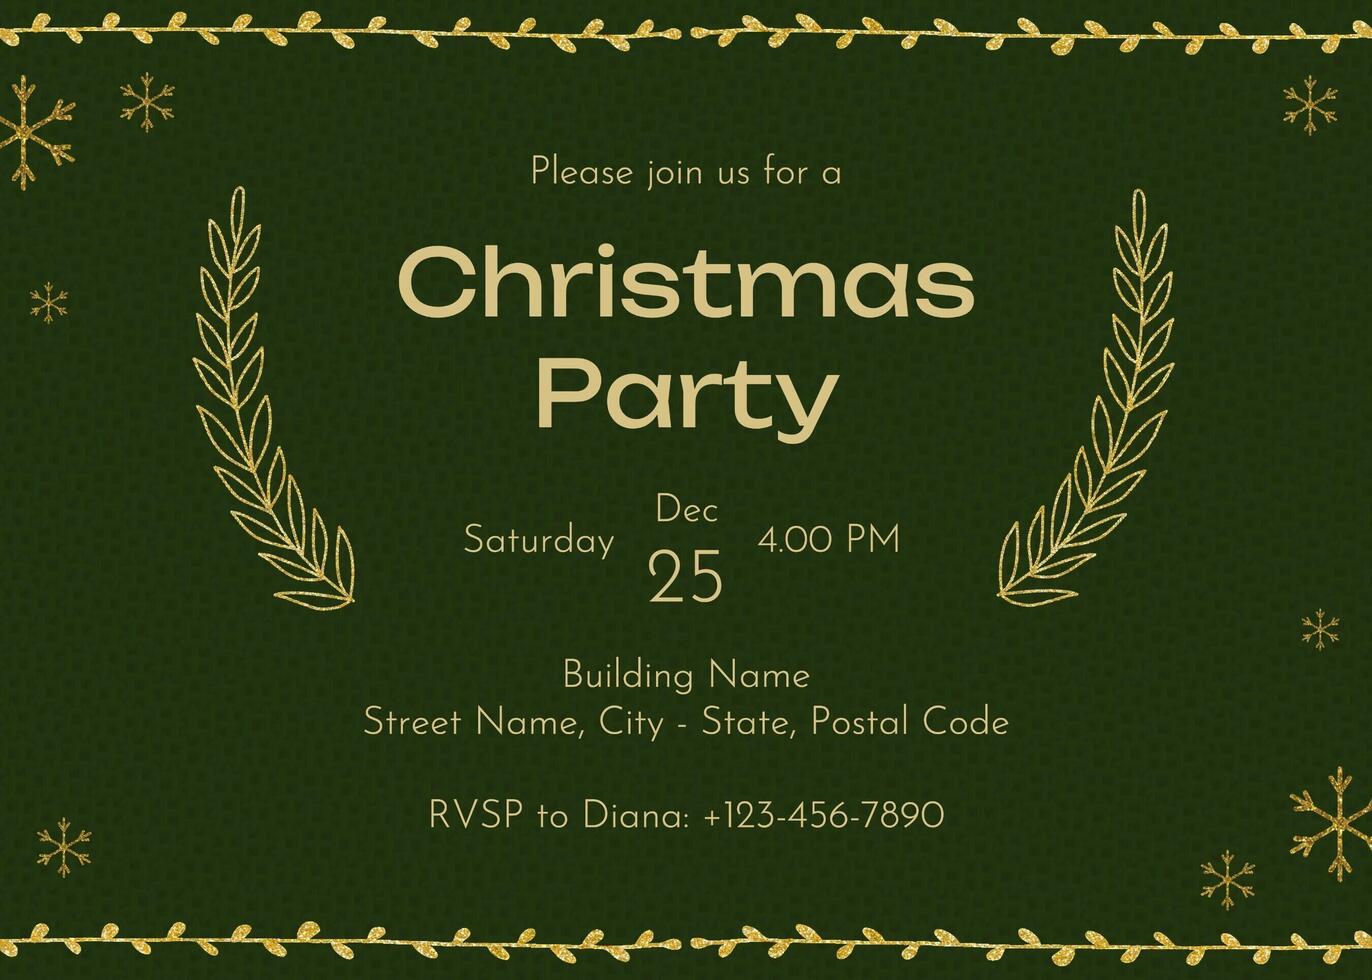 Christmas Party Invitation template